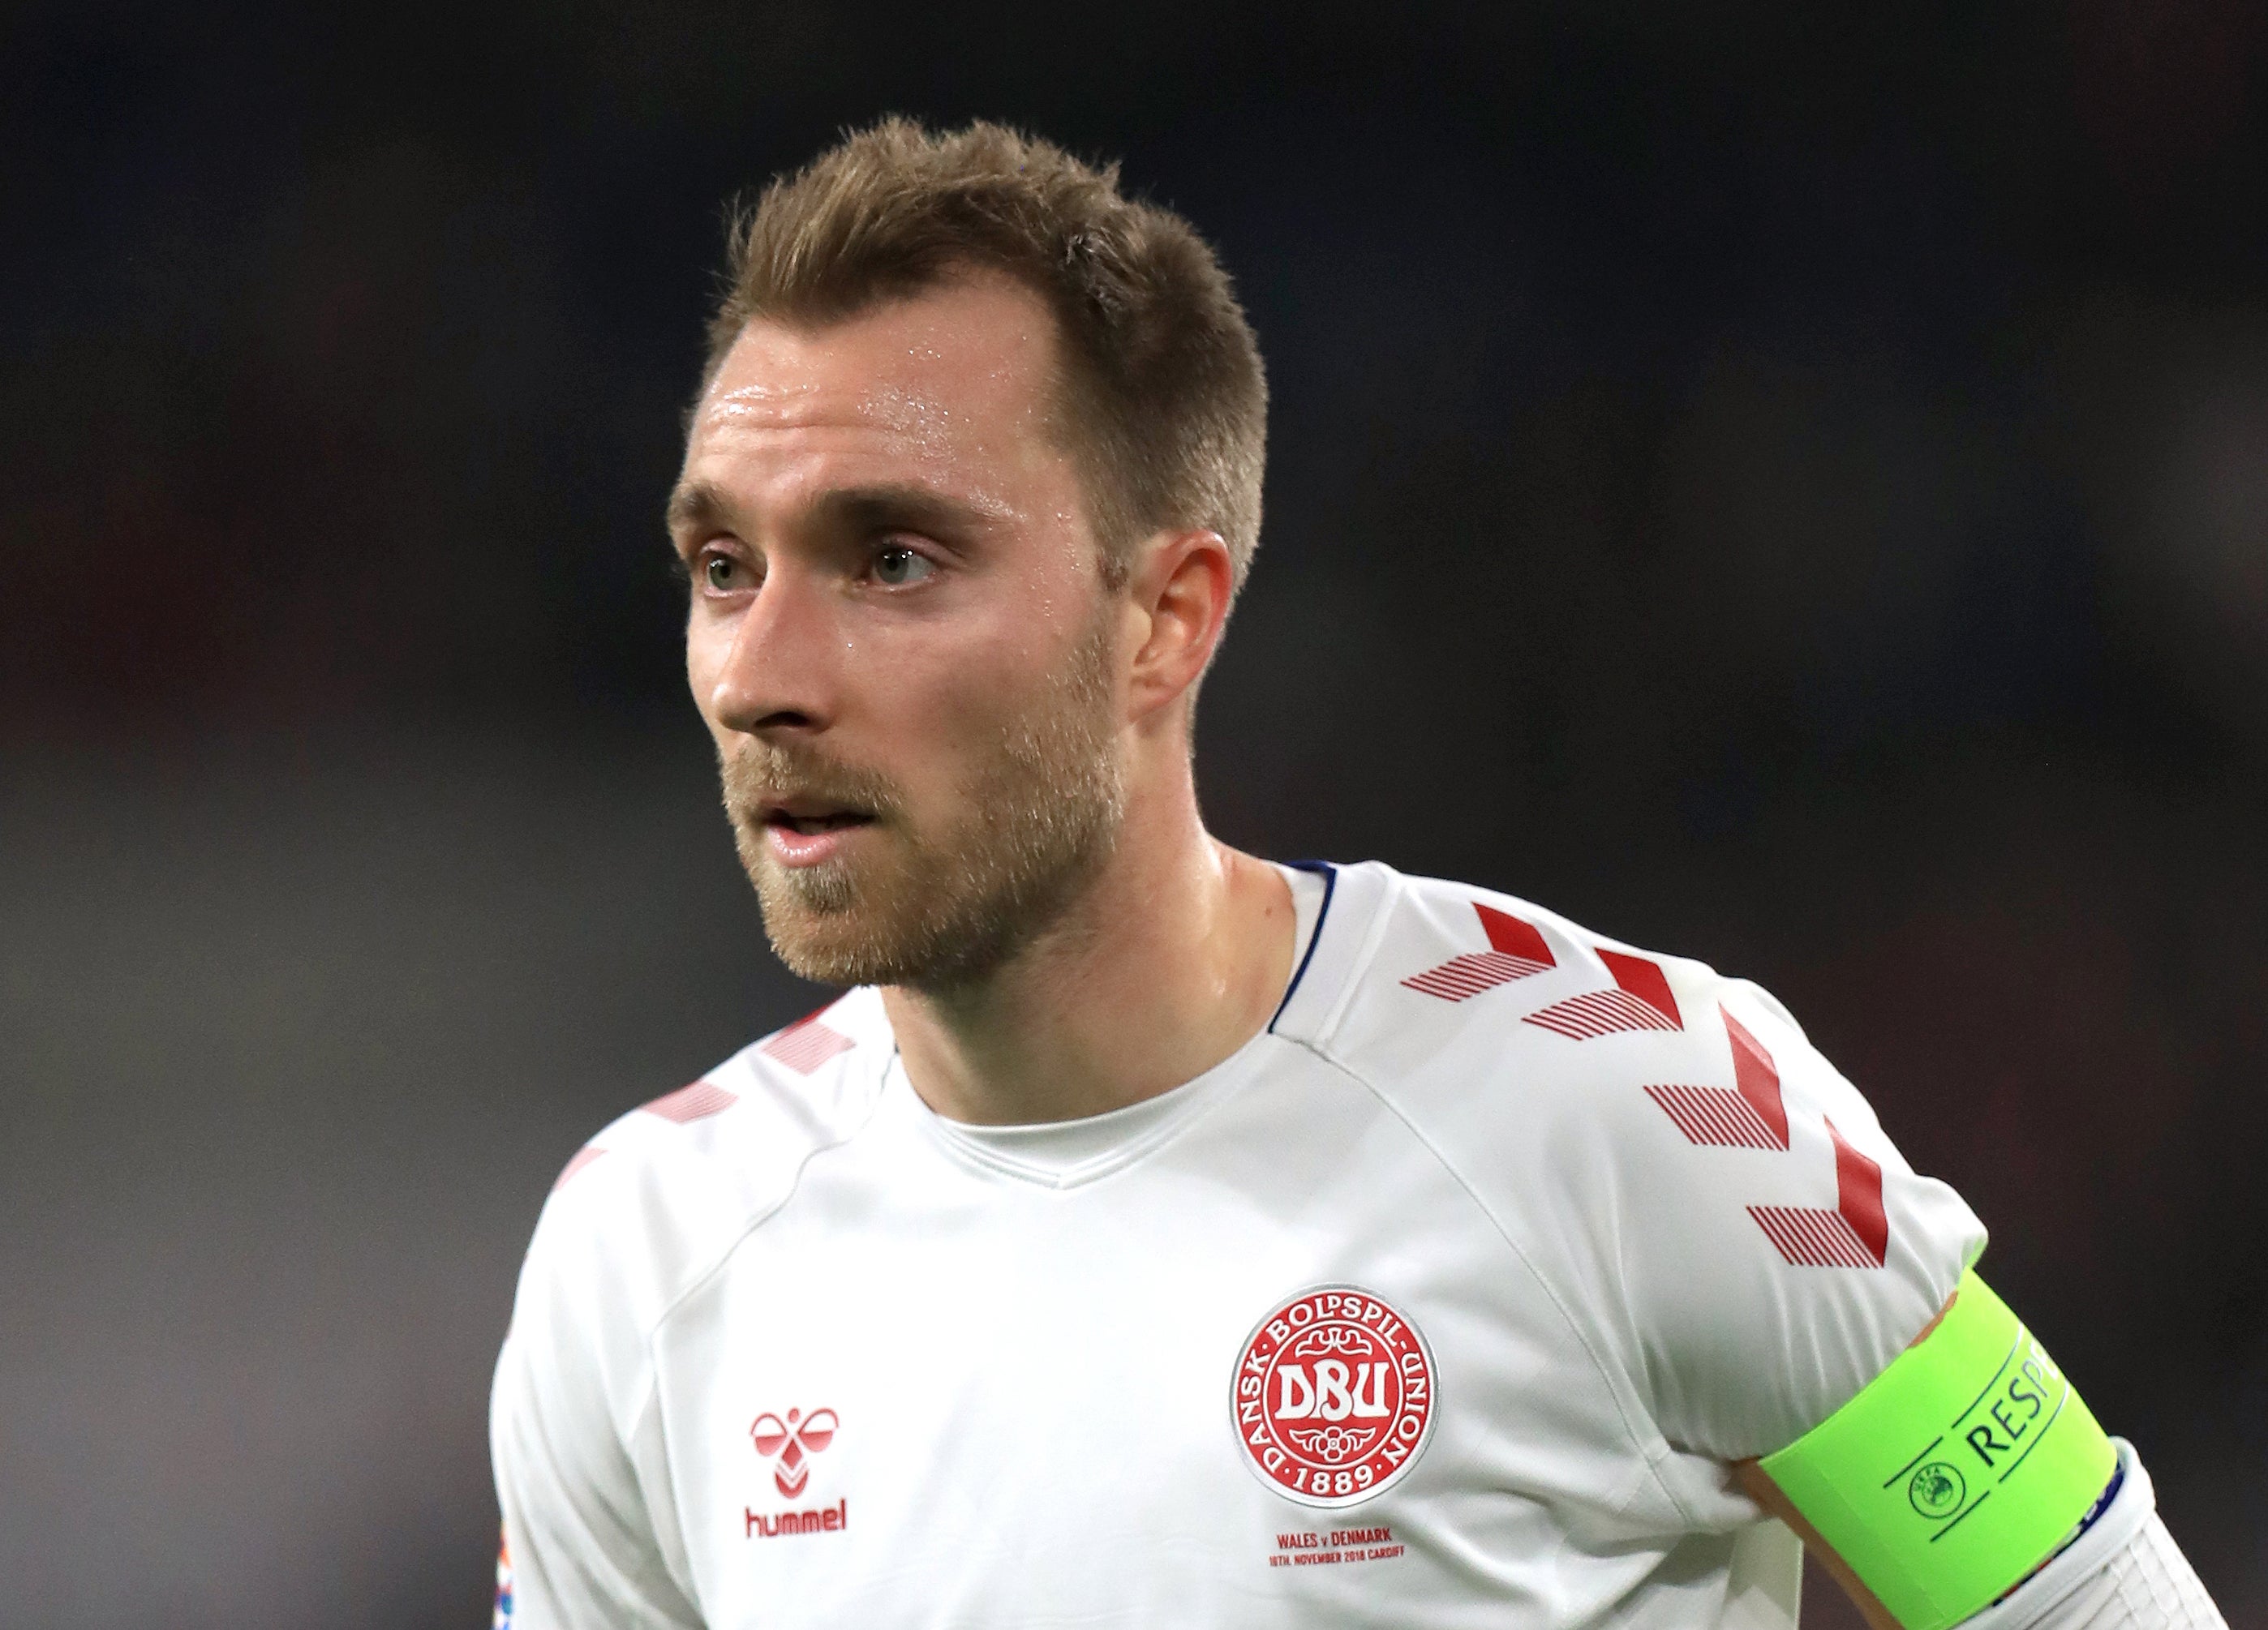 Christian Eriksen has signed for Brentford until the end of the season